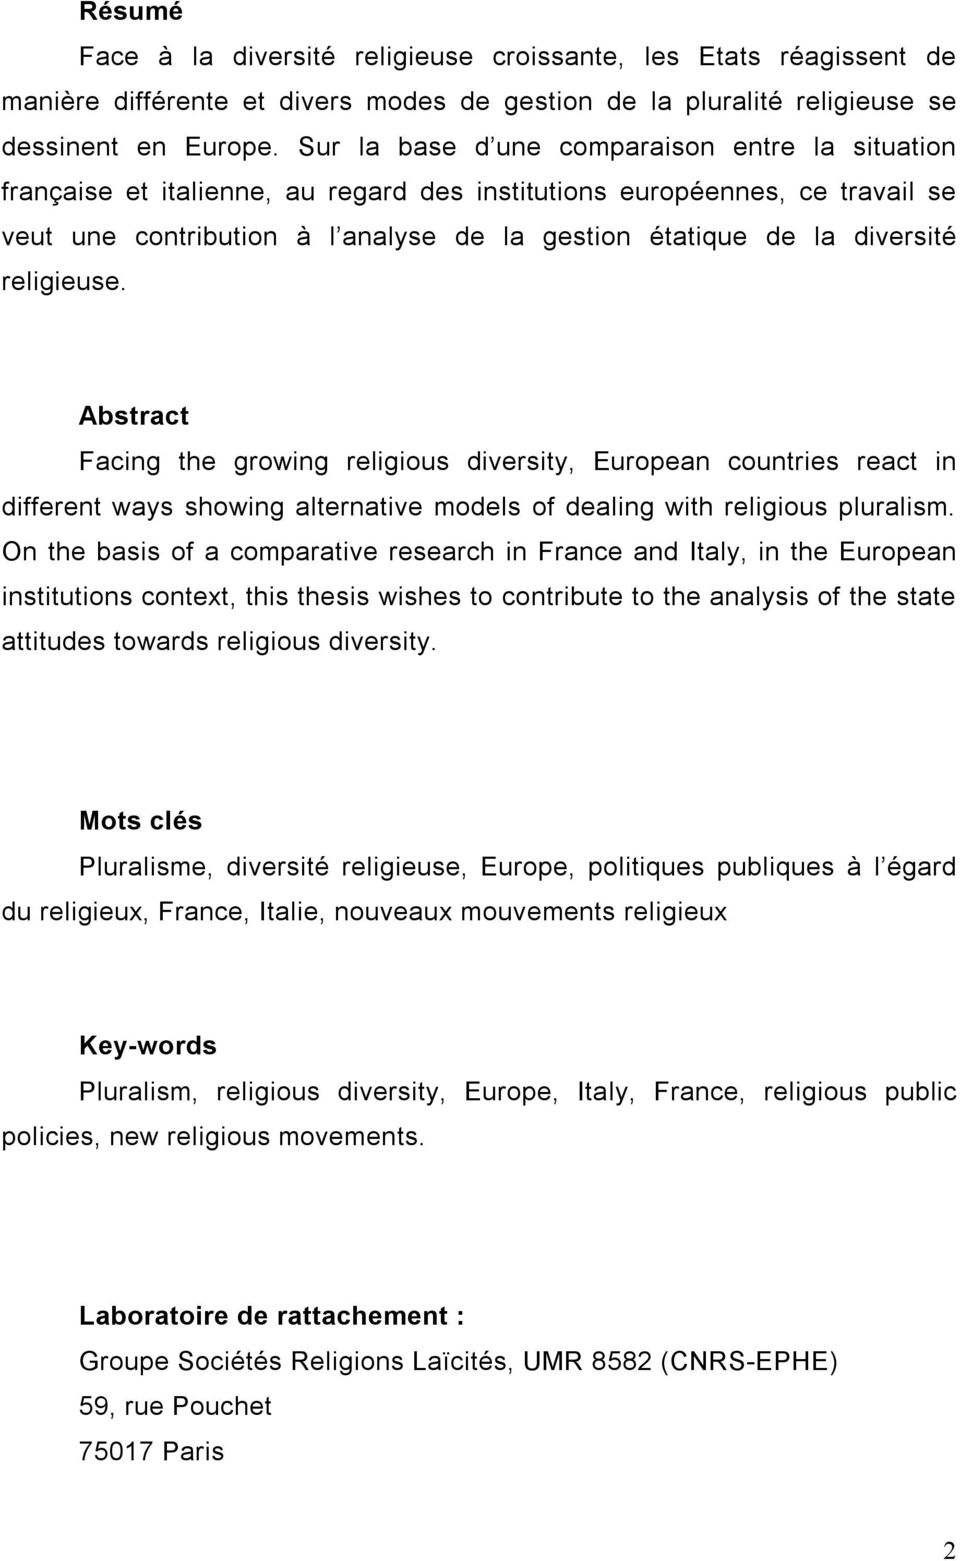 religieuse. Abstract Facing the growing religious diversity, European countries react in different ways showing alternative models of dealing with religious pluralism.